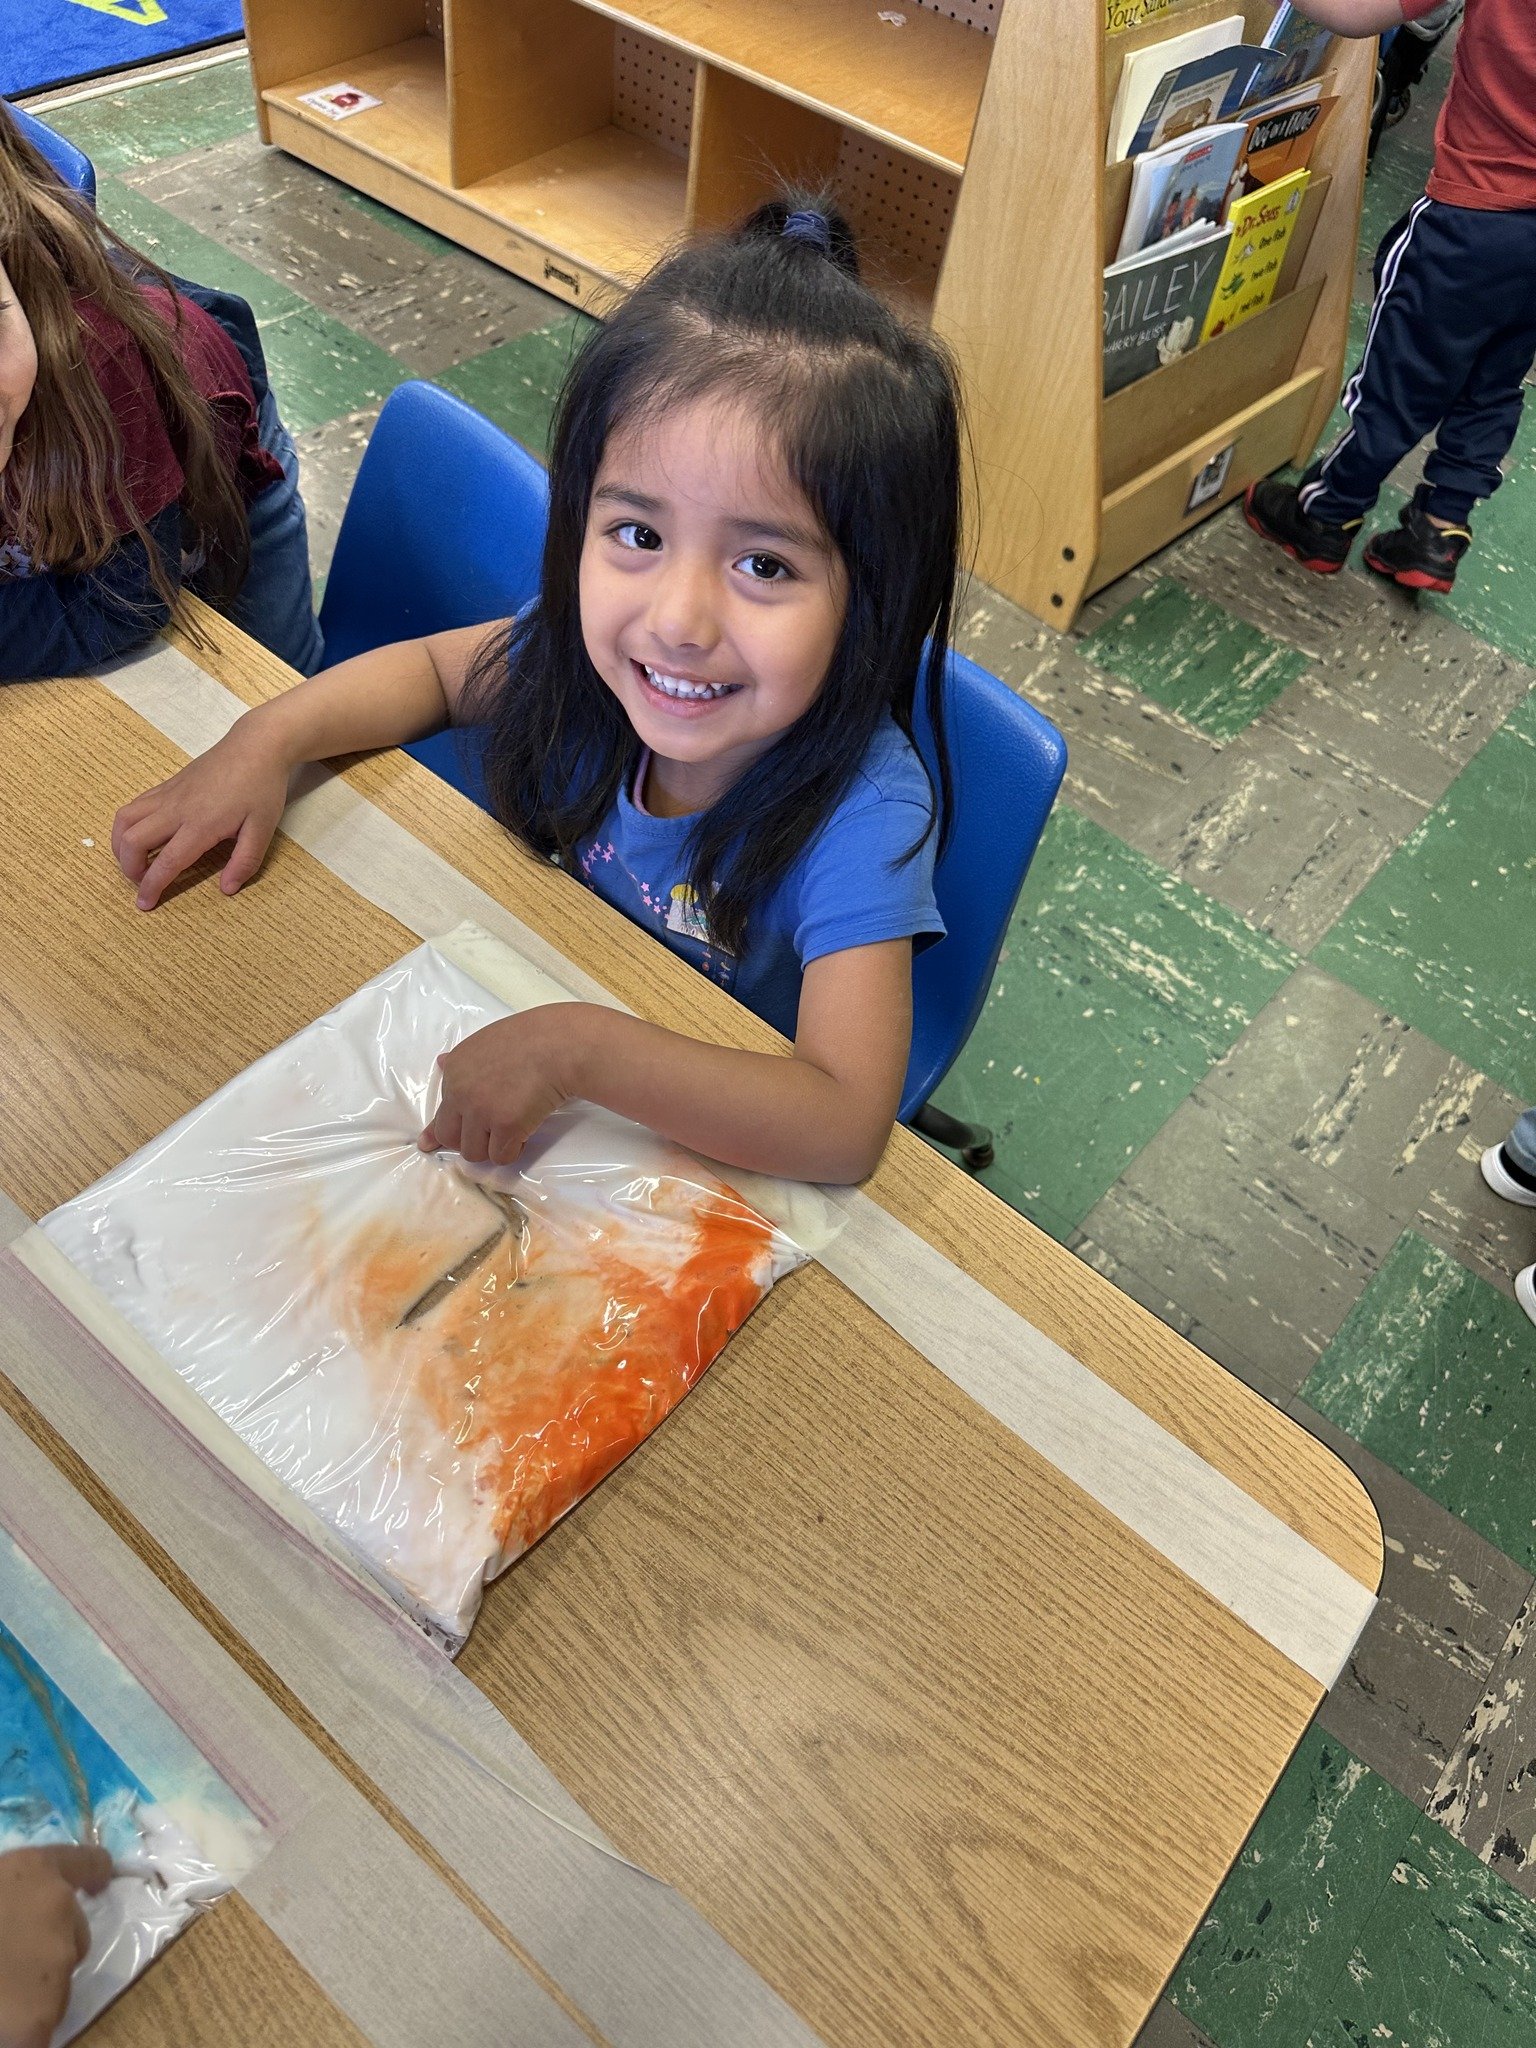  Wilson Head Start classroom #3  Ms. Reyes said, "I made sensory bags for the little ones today. A little shaving cream and washable paint and we had a fun filled letter recognition activity 